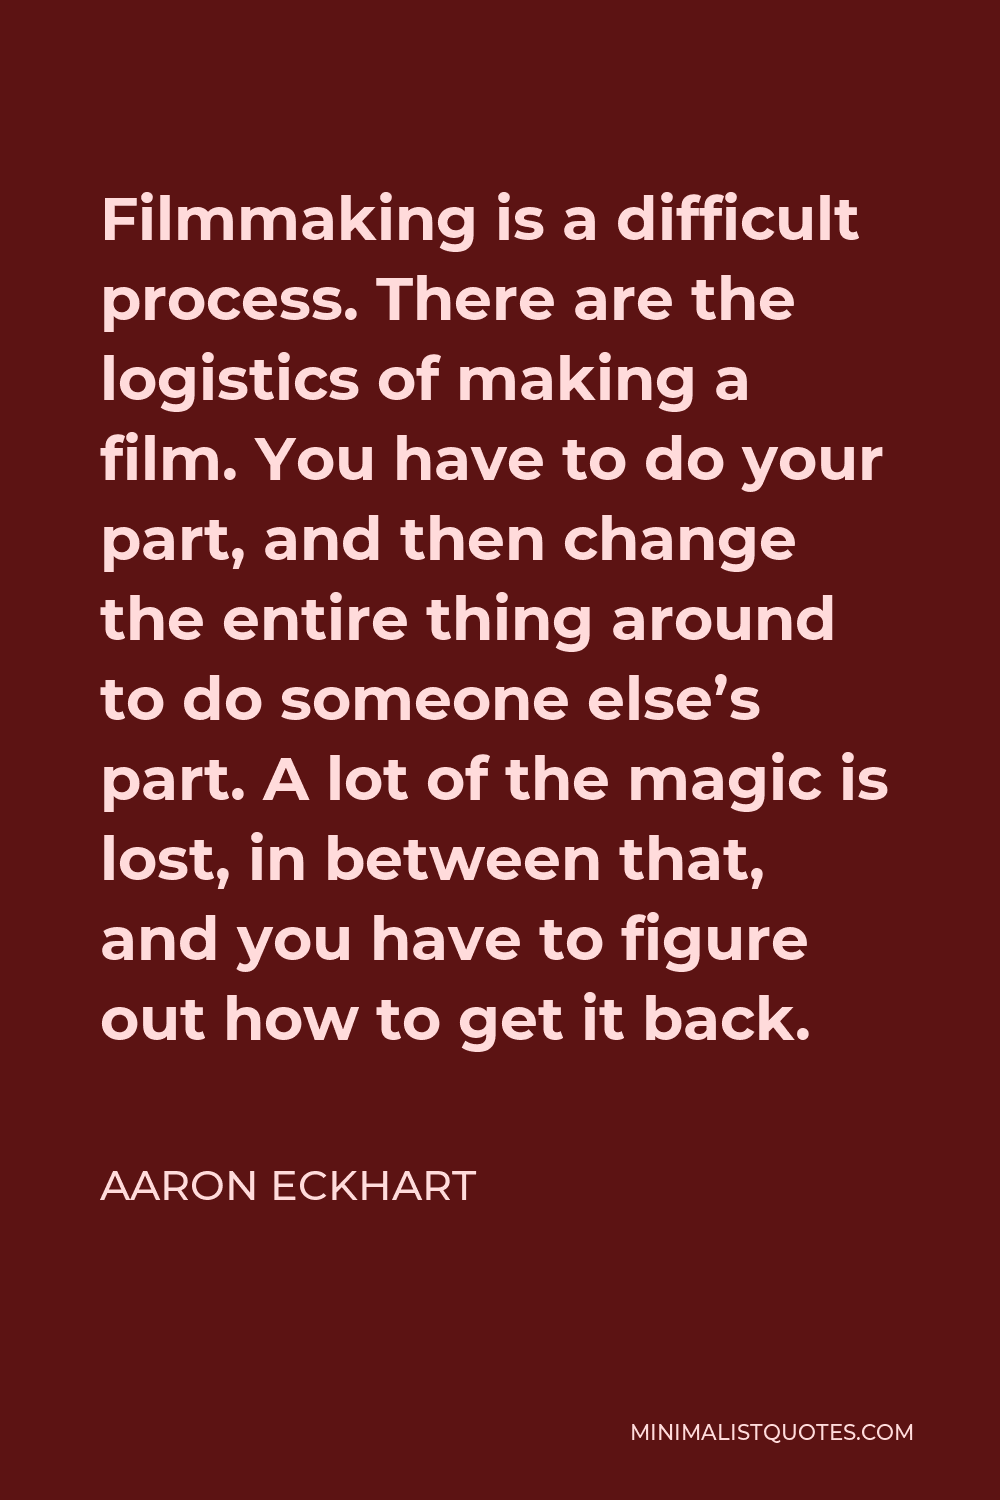 Aaron Eckhart Quote - Filmmaking is a difficult process. There are the logistics of making a film. You have to do your part, and then change the entire thing around to do someone else’s part. A lot of the magic is lost, in between that, and you have to figure out how to get it back.